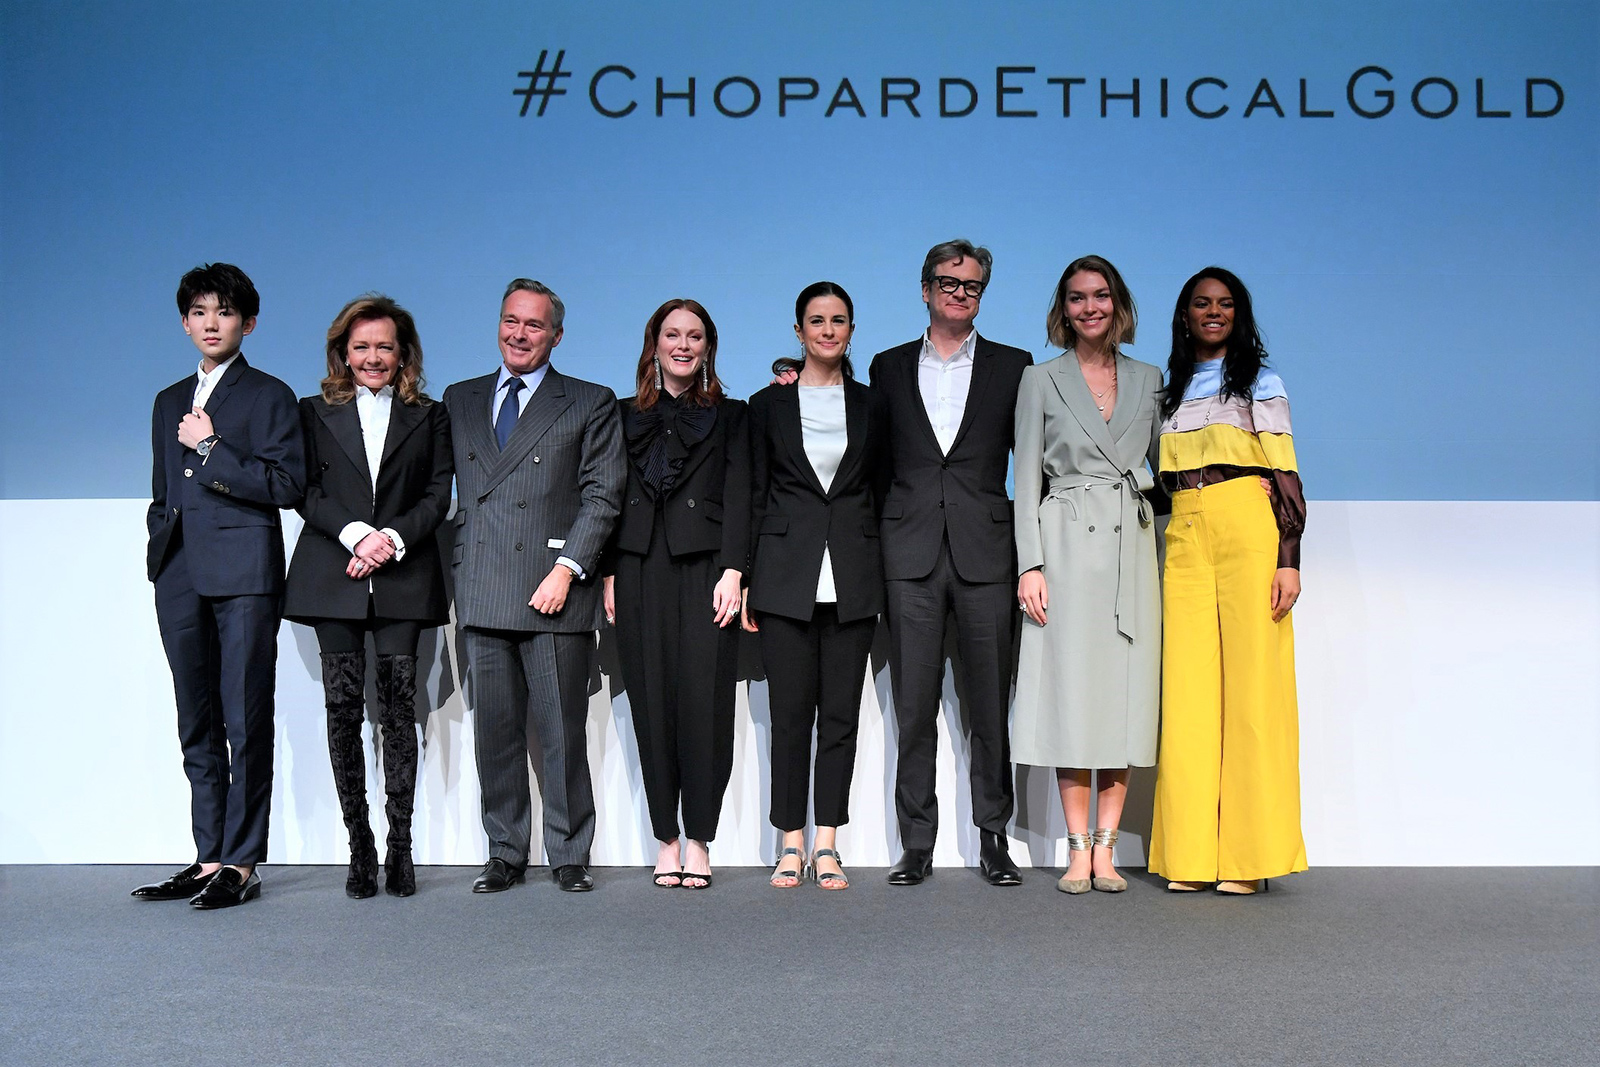 #ChopardEthicalGold commitment pledge by Caroline and Karl-Friedrich Scheufele, alongside brand ambassadors Colin Firth and his environmental activist wife Livia Firth, Julianne Moore, models and activists Arizona Muse and Noëlla Coursaris Musunka and Roy Van